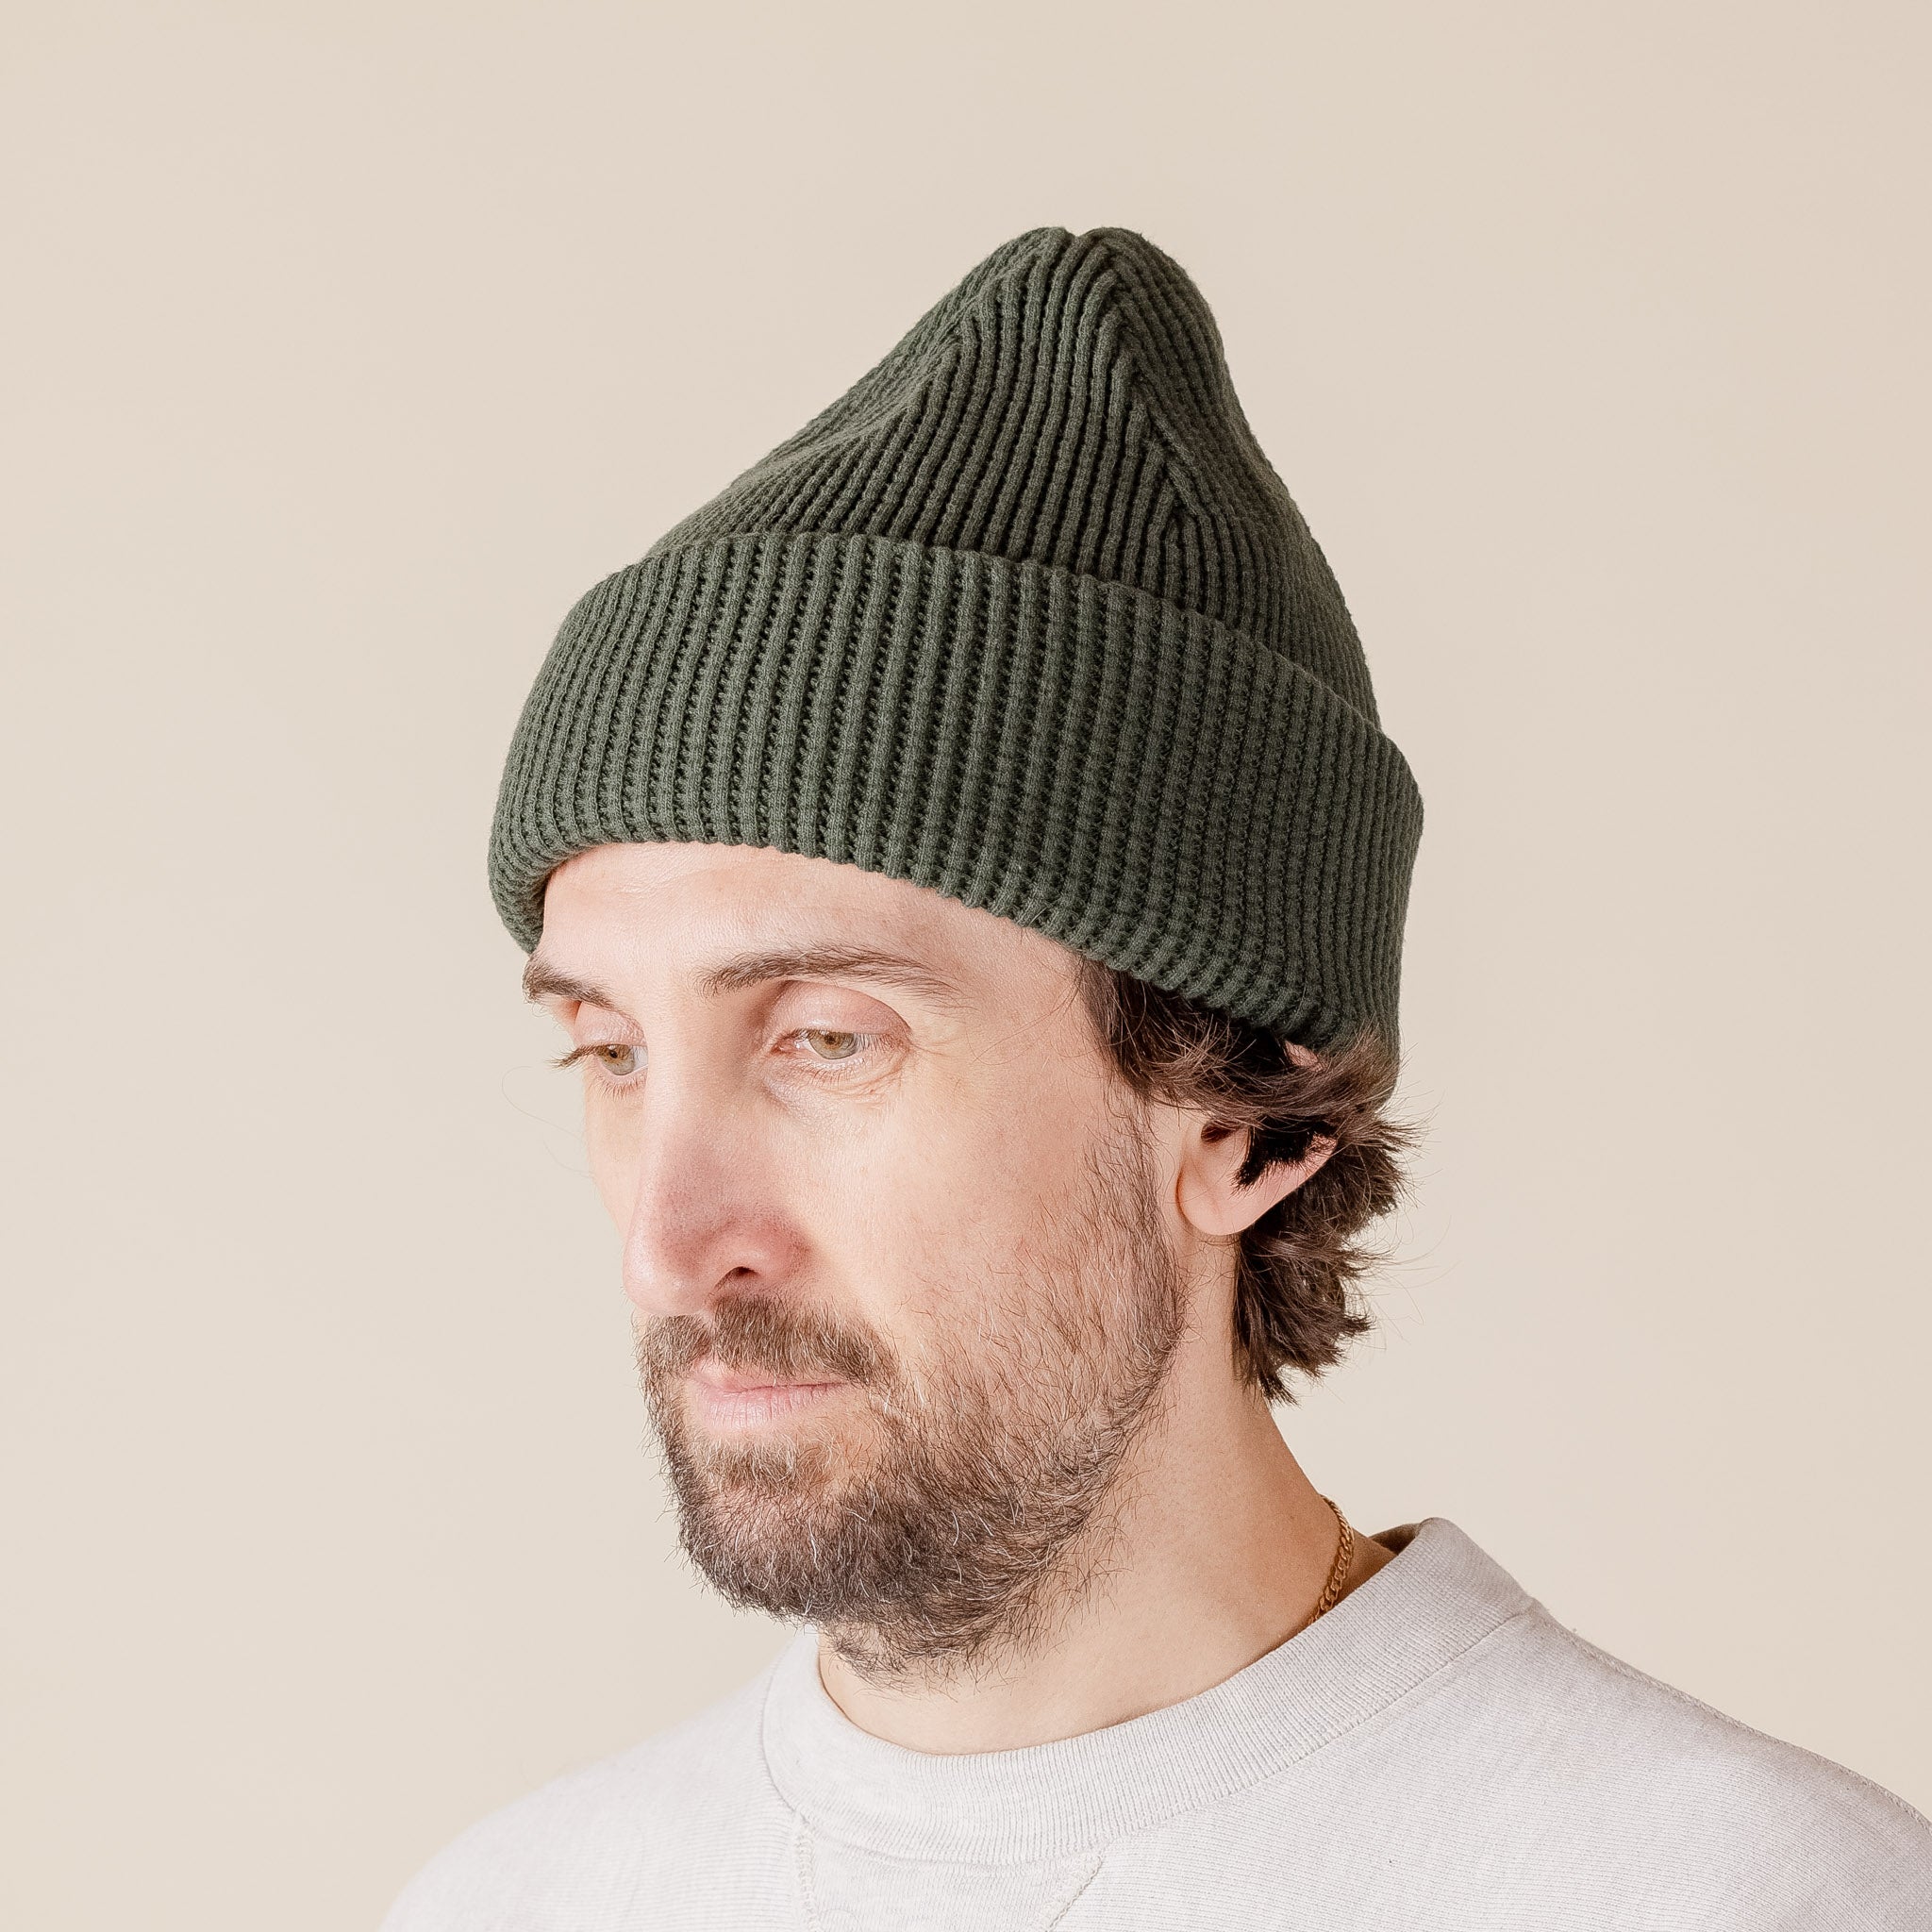 Homespun Knitwear - Cotton Thermal Waffle Beanie - Forest Green